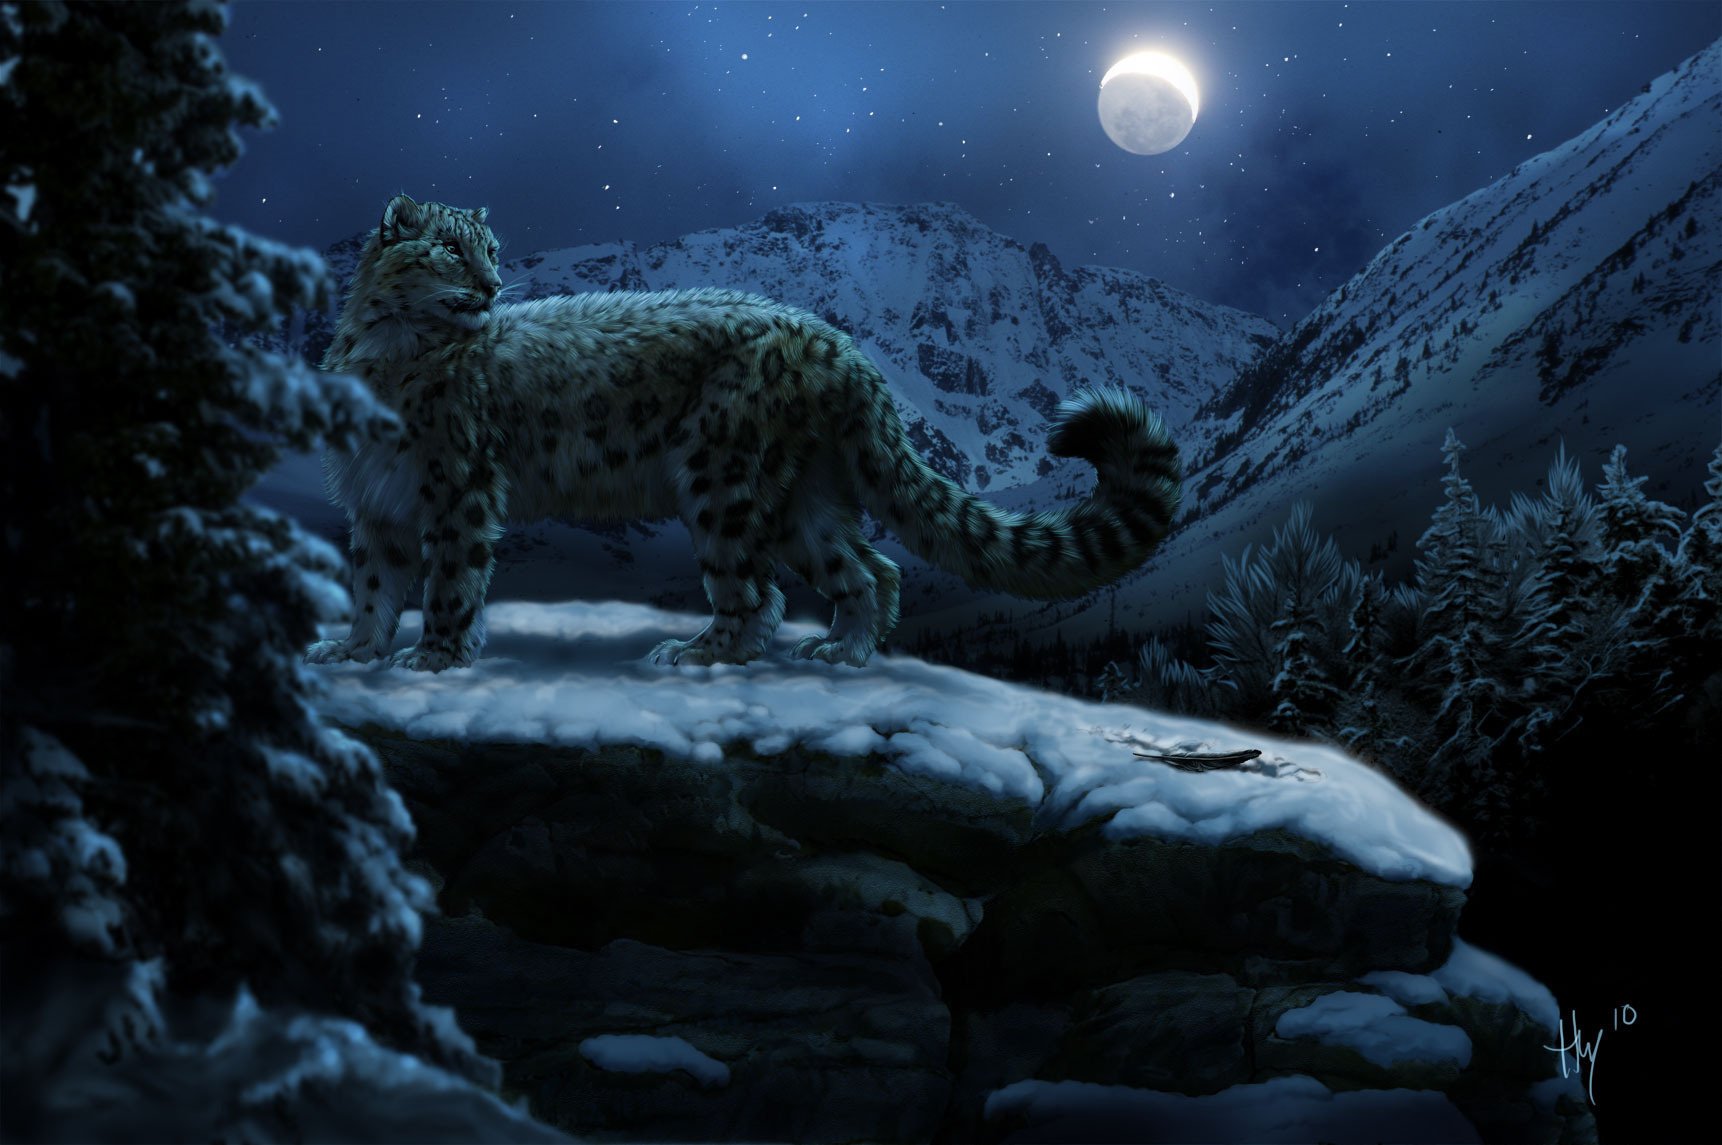 Snow leopard at night in the mountains